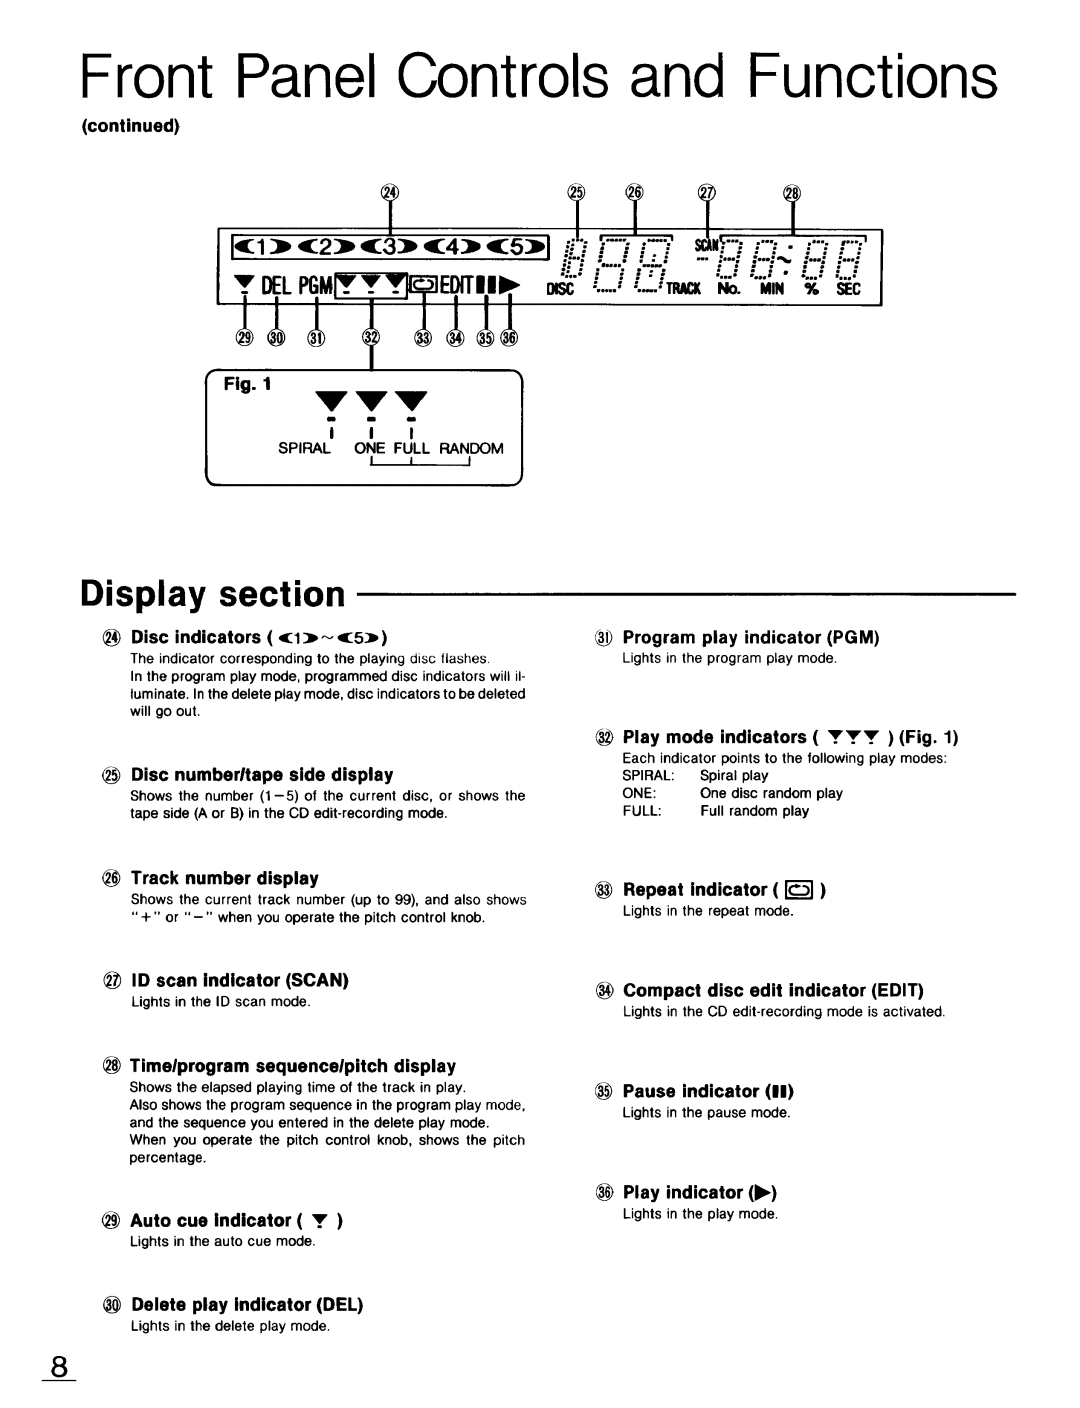 Technics SL-PD947 Display section, Front Panel Controls and Functions, continued, Disc indicators, Track number display 